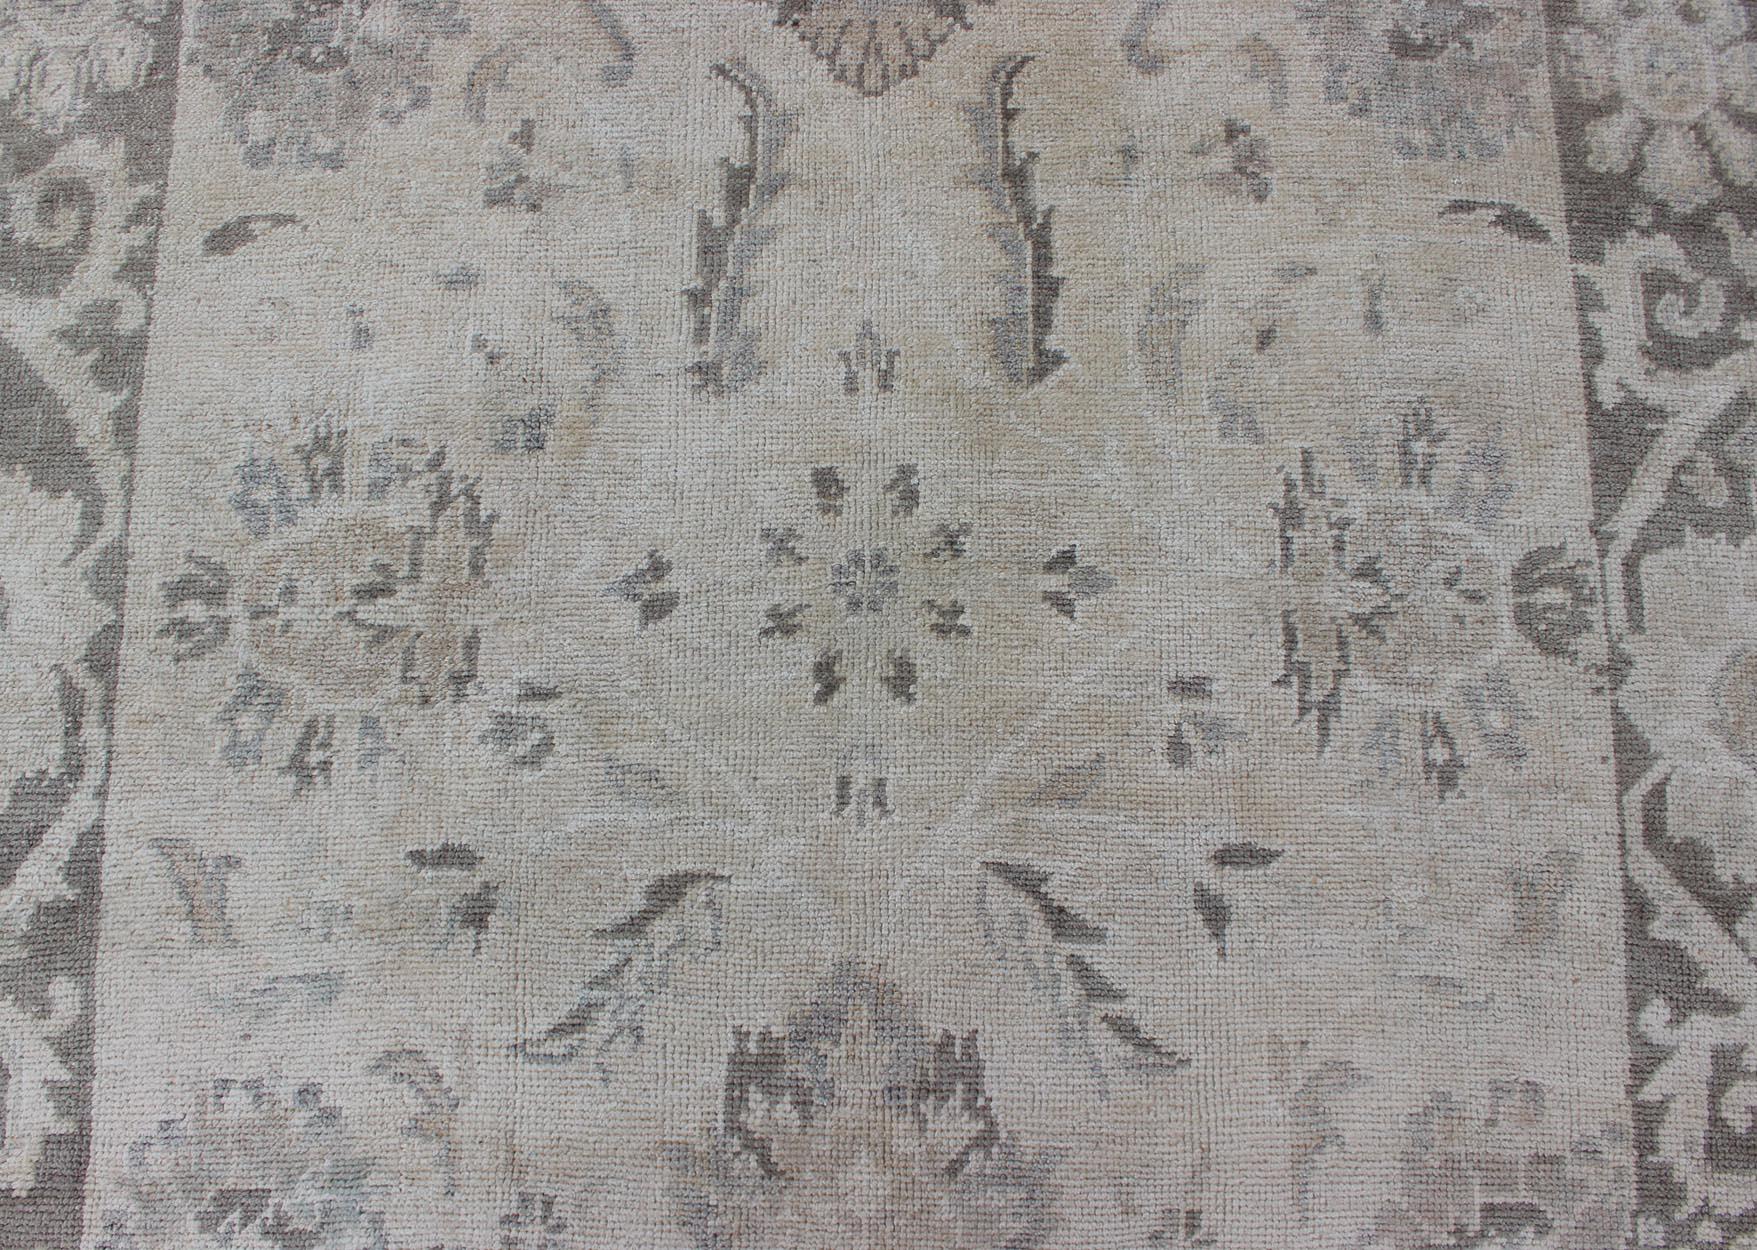 Wool Oushak Runner with Traditional Floral/Botanical Design in Taupe, Gray and Cream For Sale